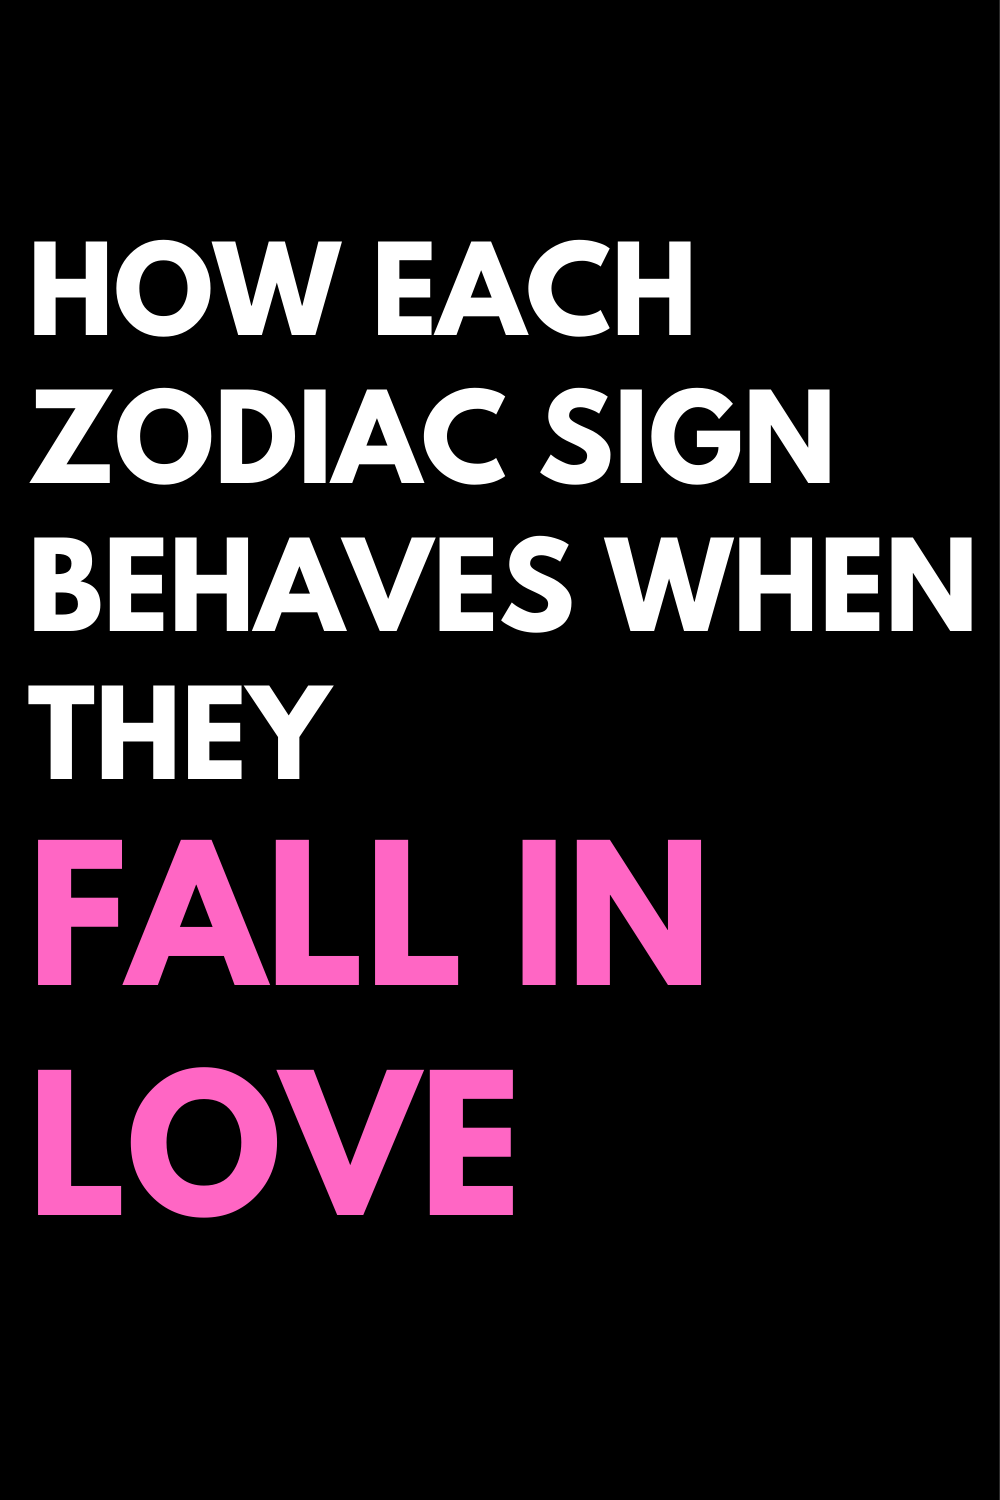 How Each Zodiac Sign Behaves When They Fall In Love